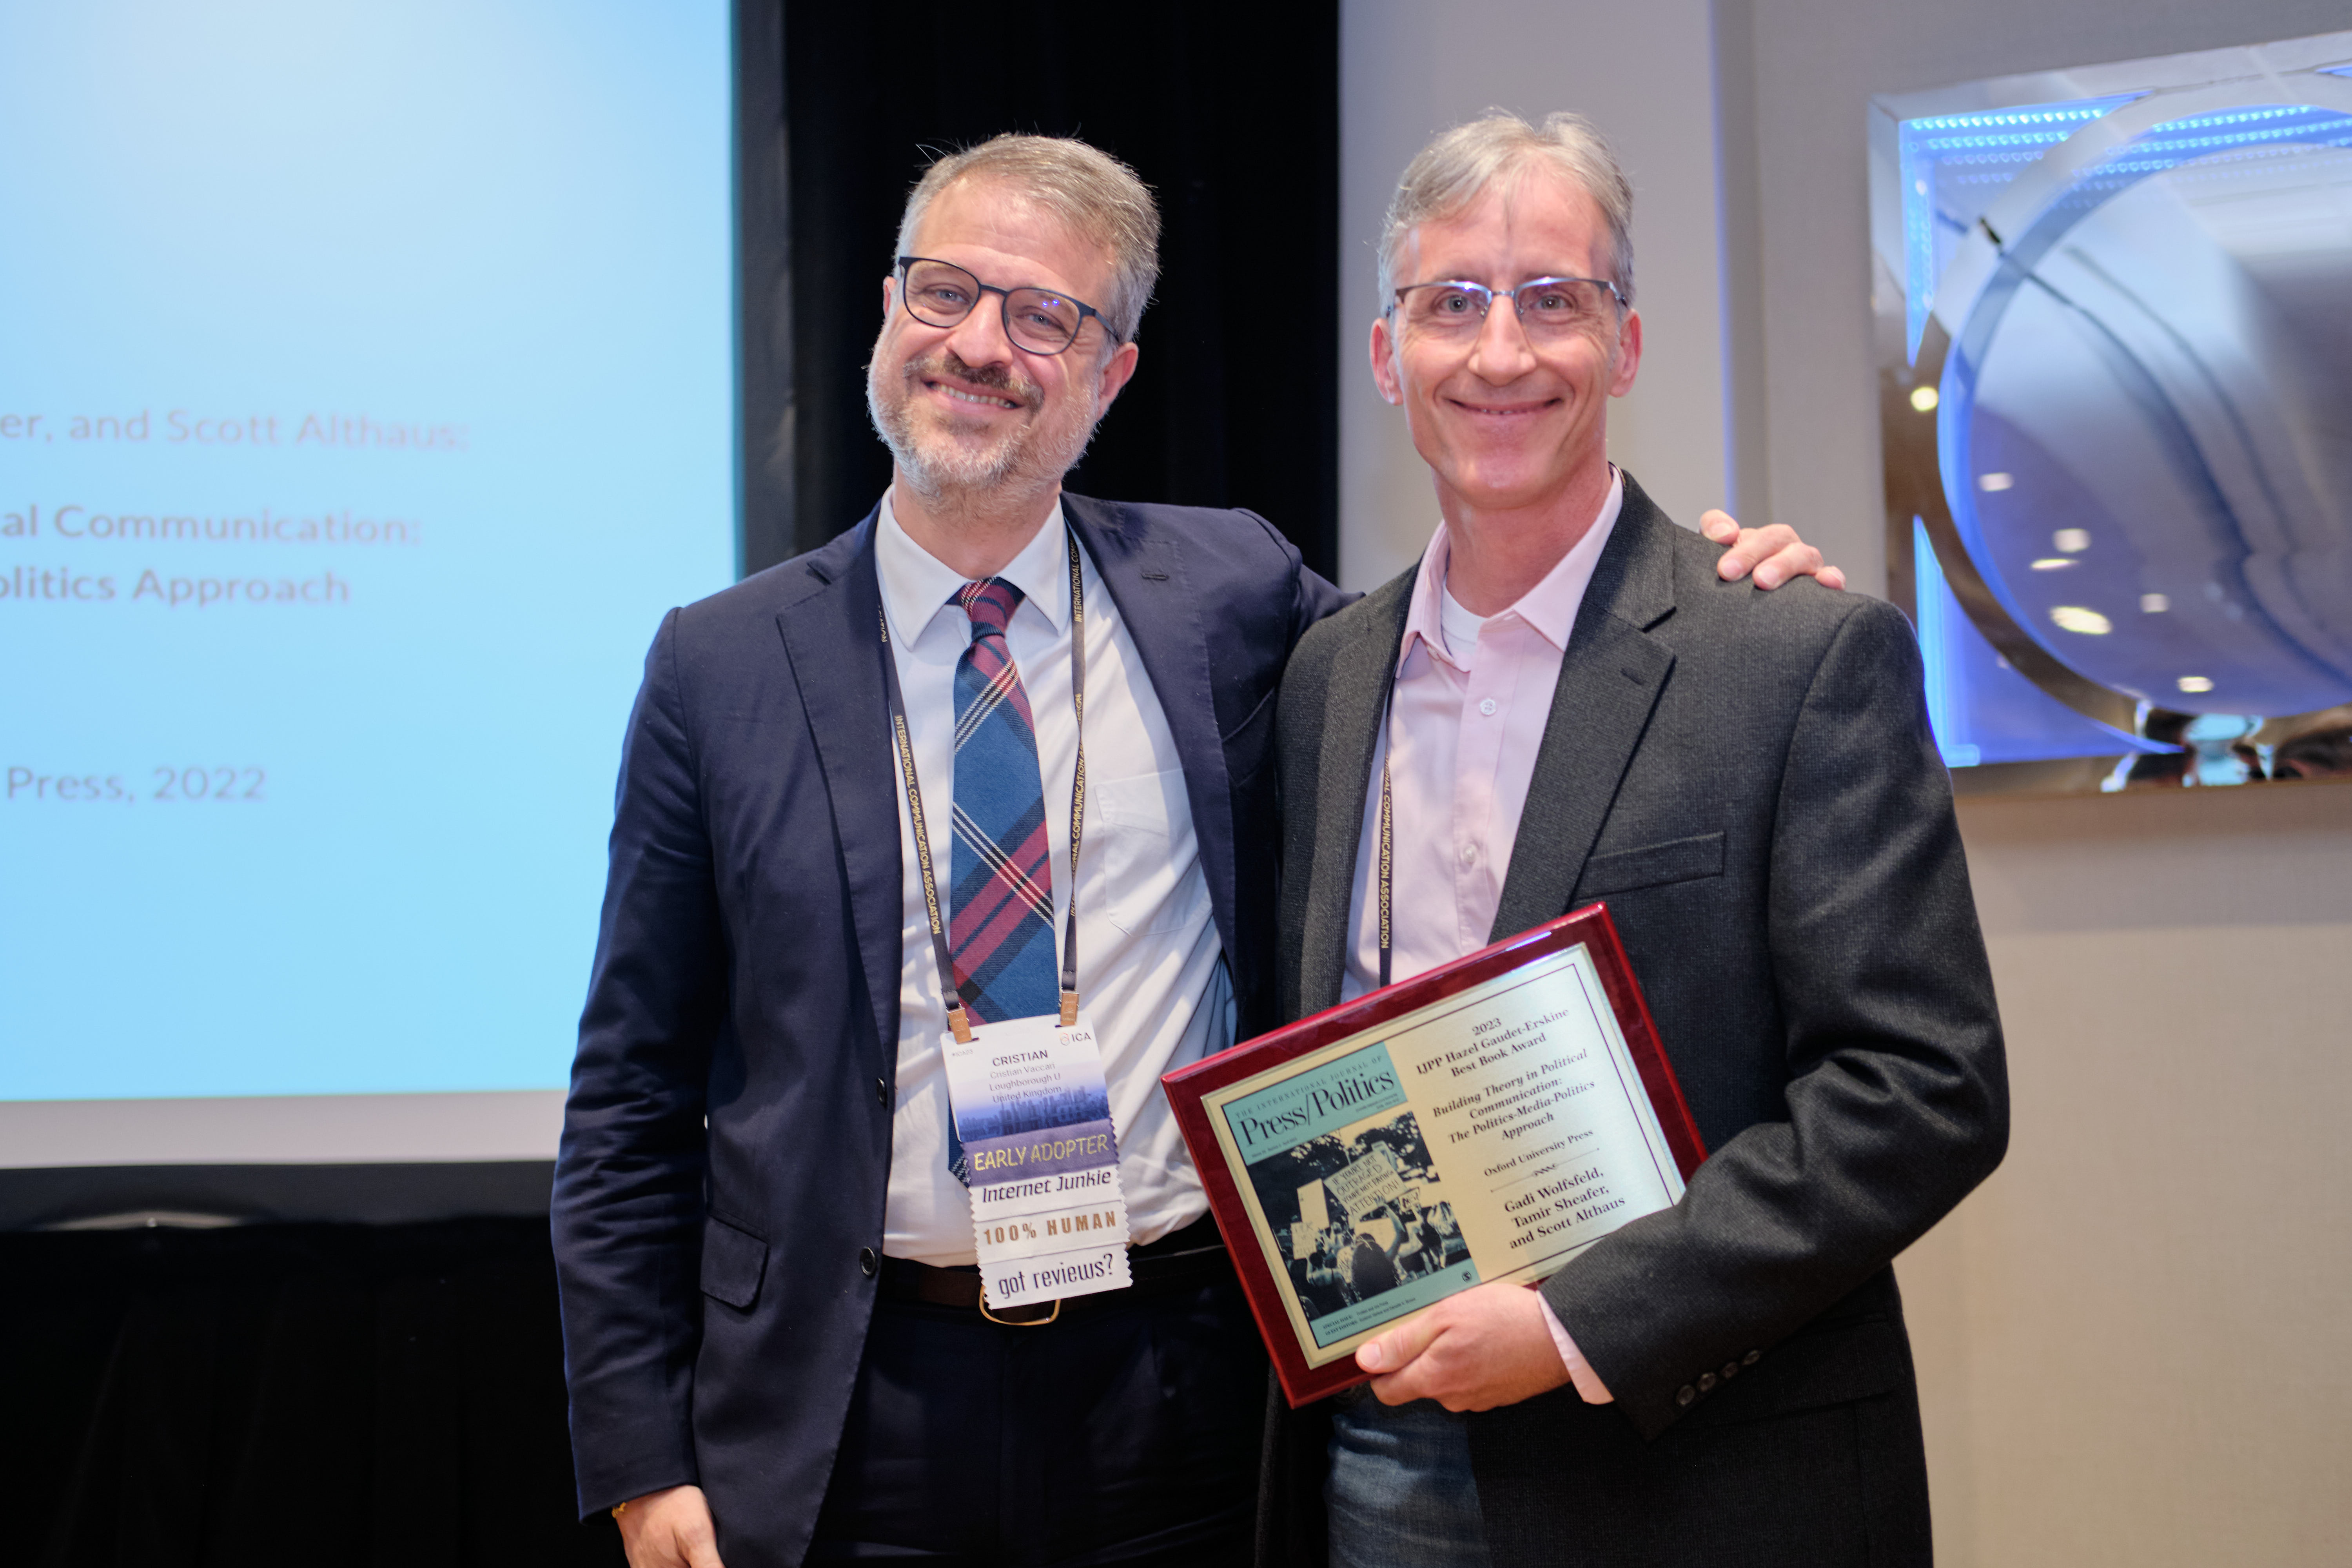 Scott Althaus accepting the 2023 IJPP Best Book Award from Cristian Vaccari at ICA